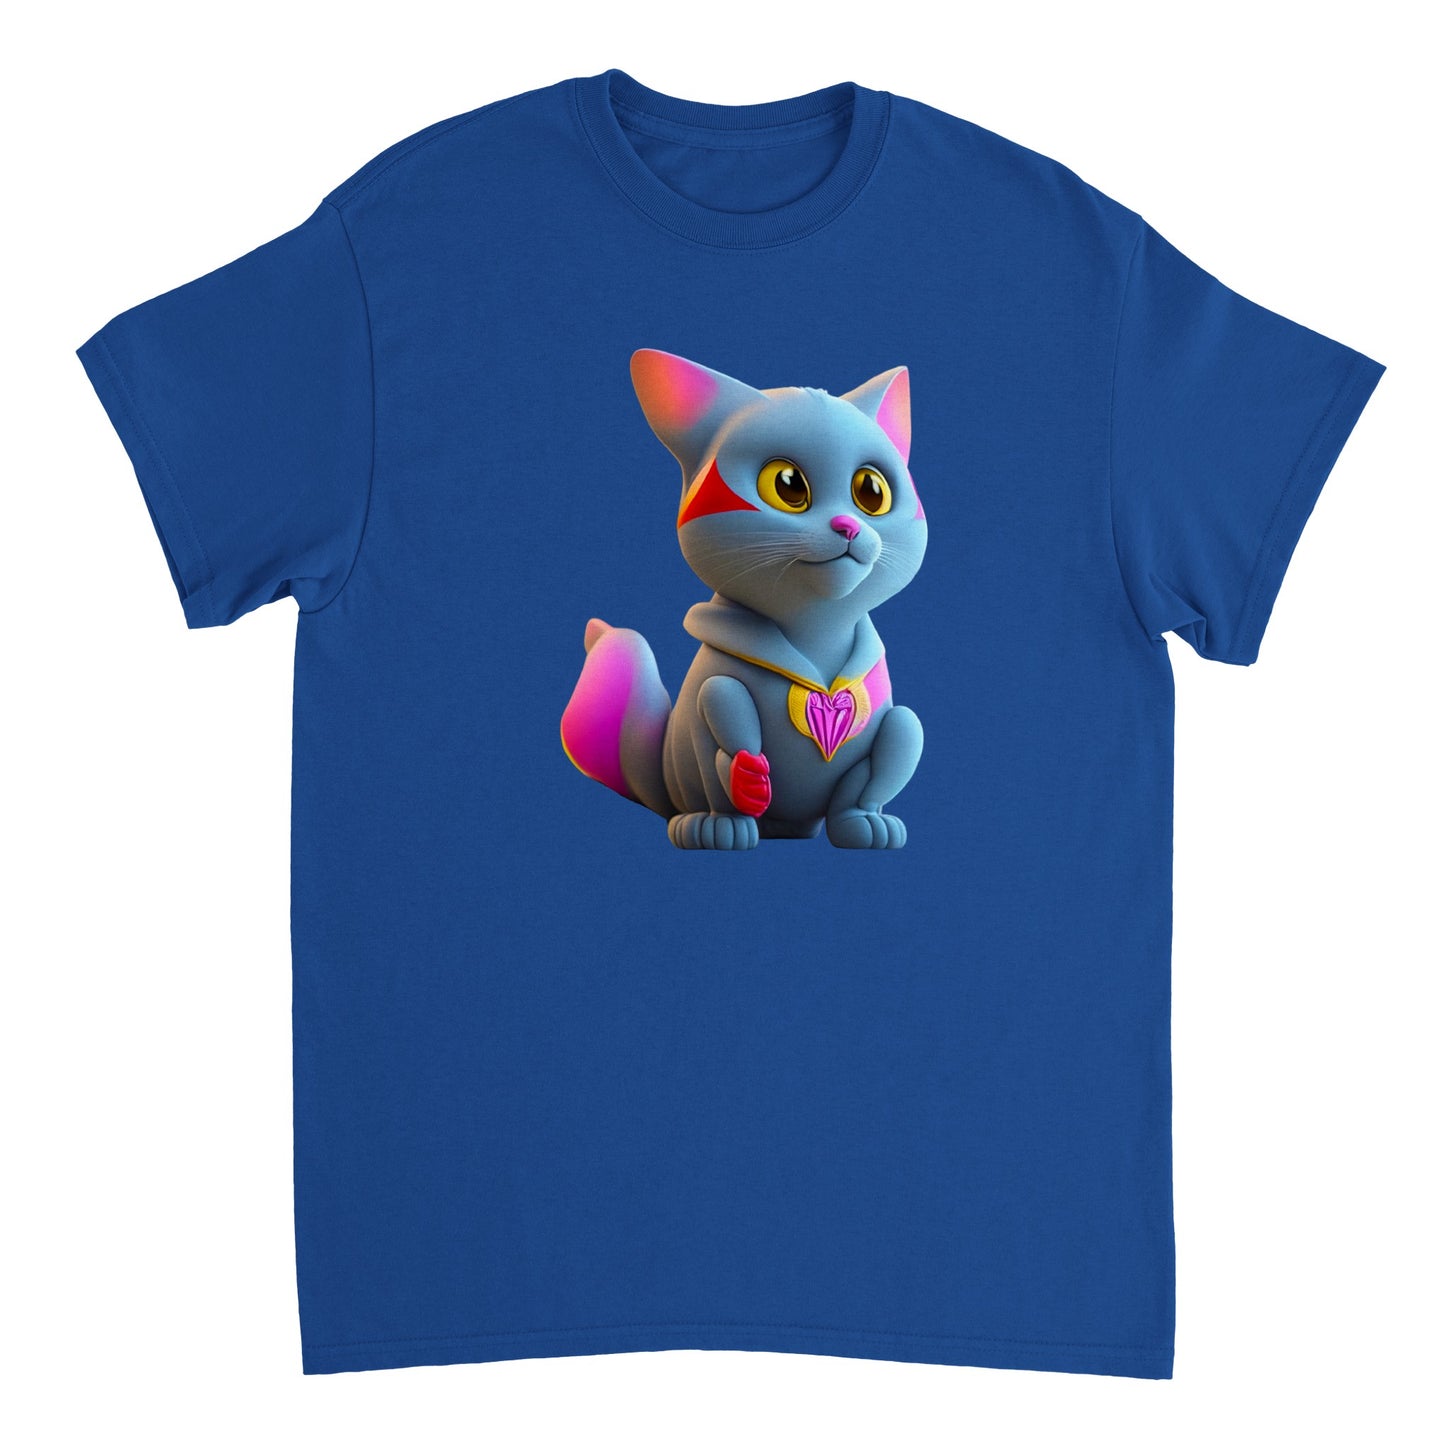 Adorable, Cool, Cute Cats and Kittens Toy - Heavyweight Unisex Crewneck T-shirt 63